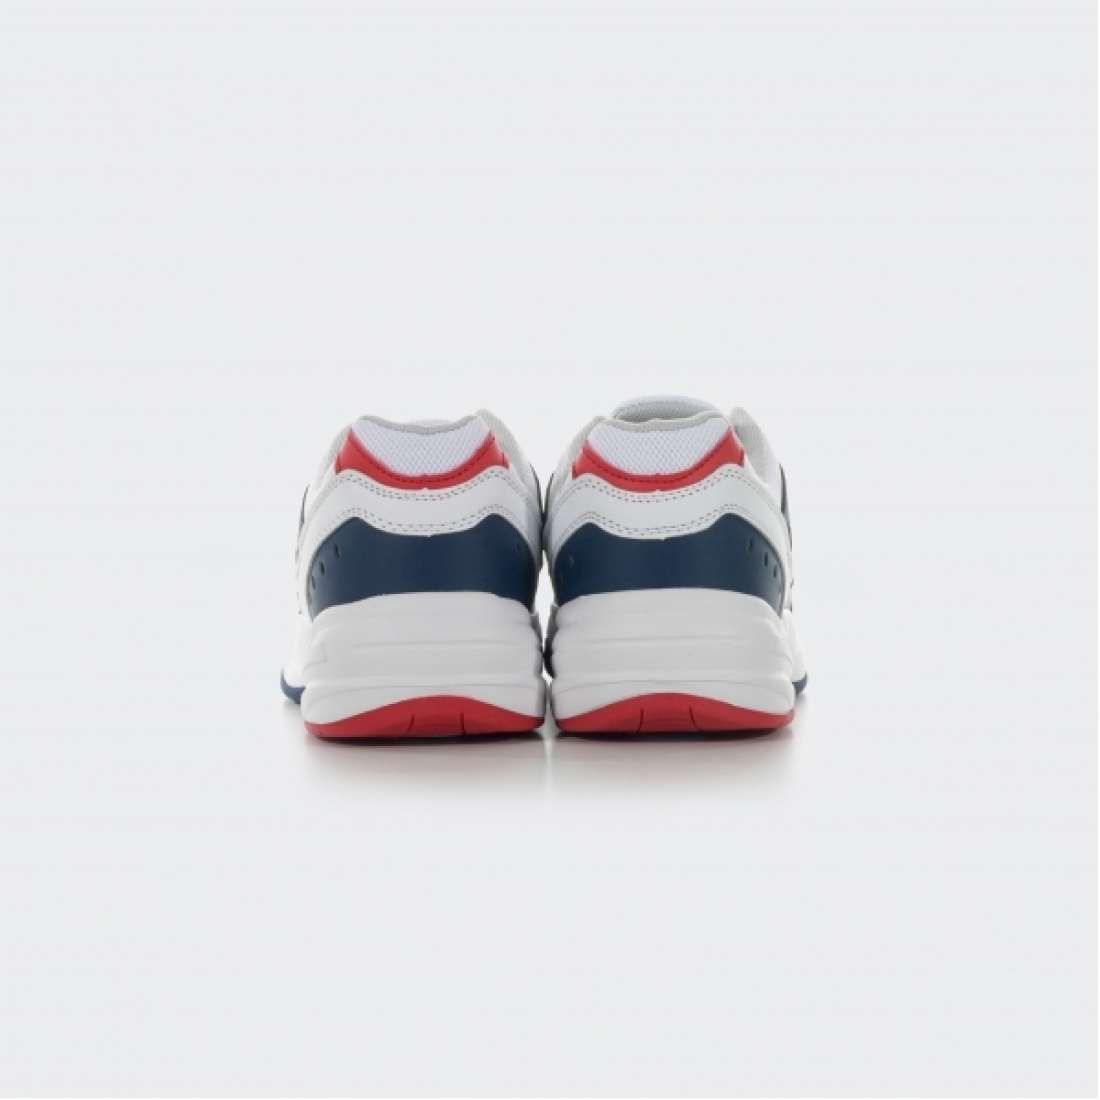 CHAMPION LOW CUT SHOE PHILLY MESH WHITE/NAVY